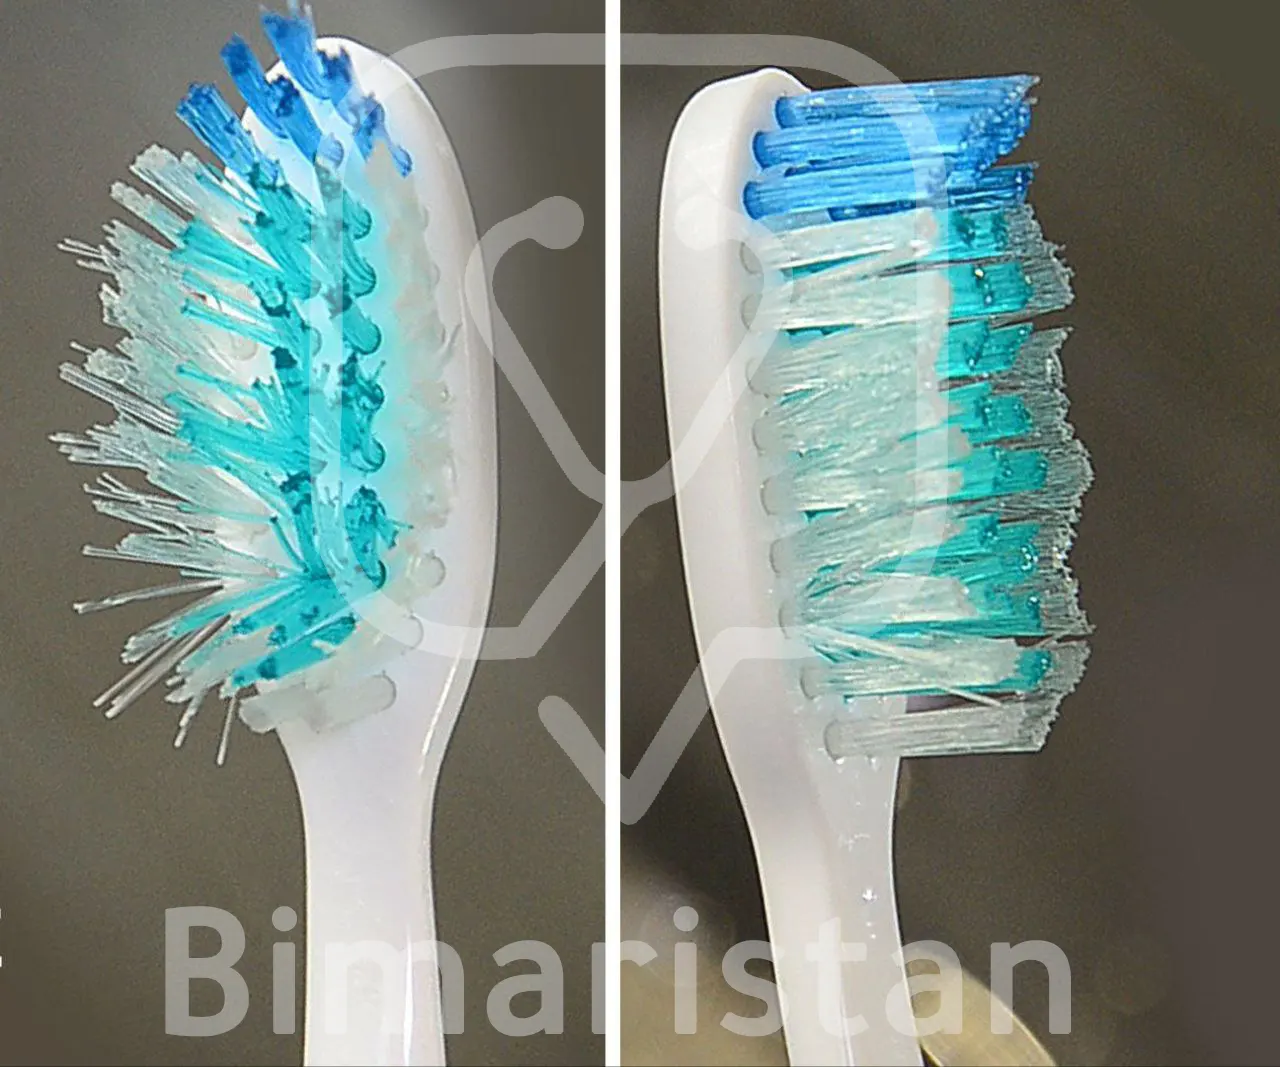 The photo on the left shows apparent damage to the toothbrush bristles and should therefore be replaced